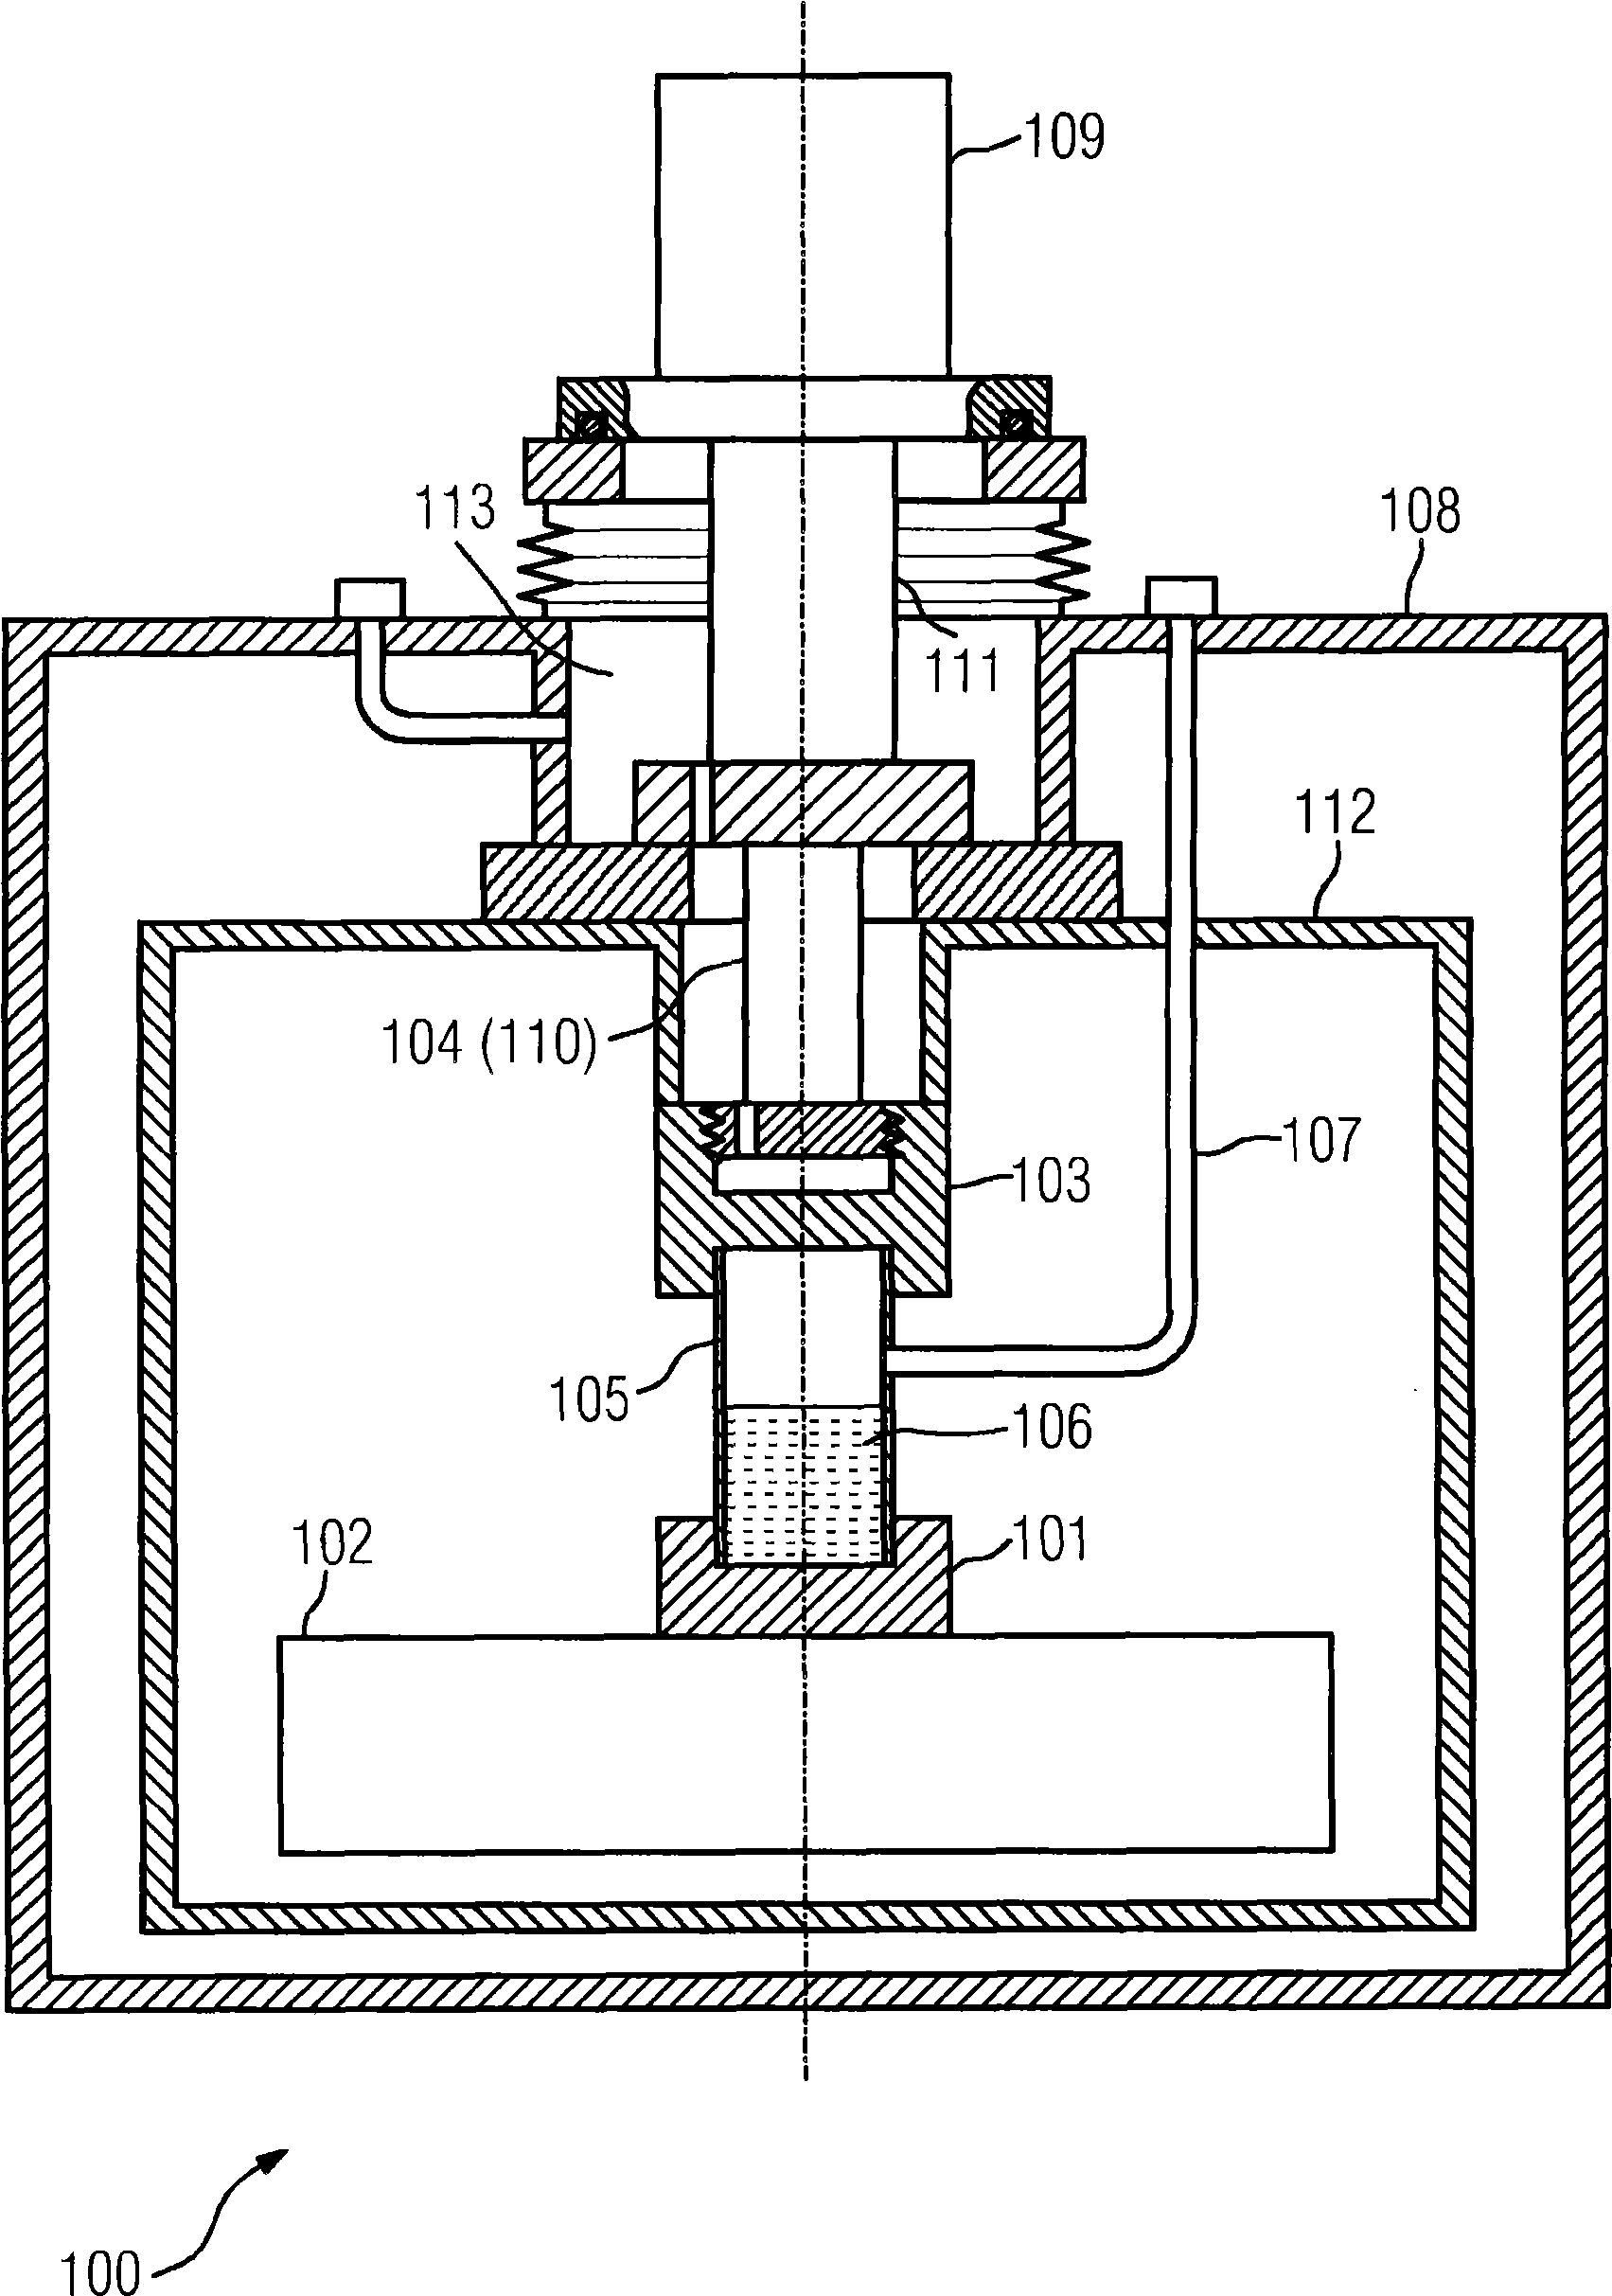 Refrigerating arrangement comprising a hot connection element and a cold connection element and a heat exchanger tube connected to the connection elements